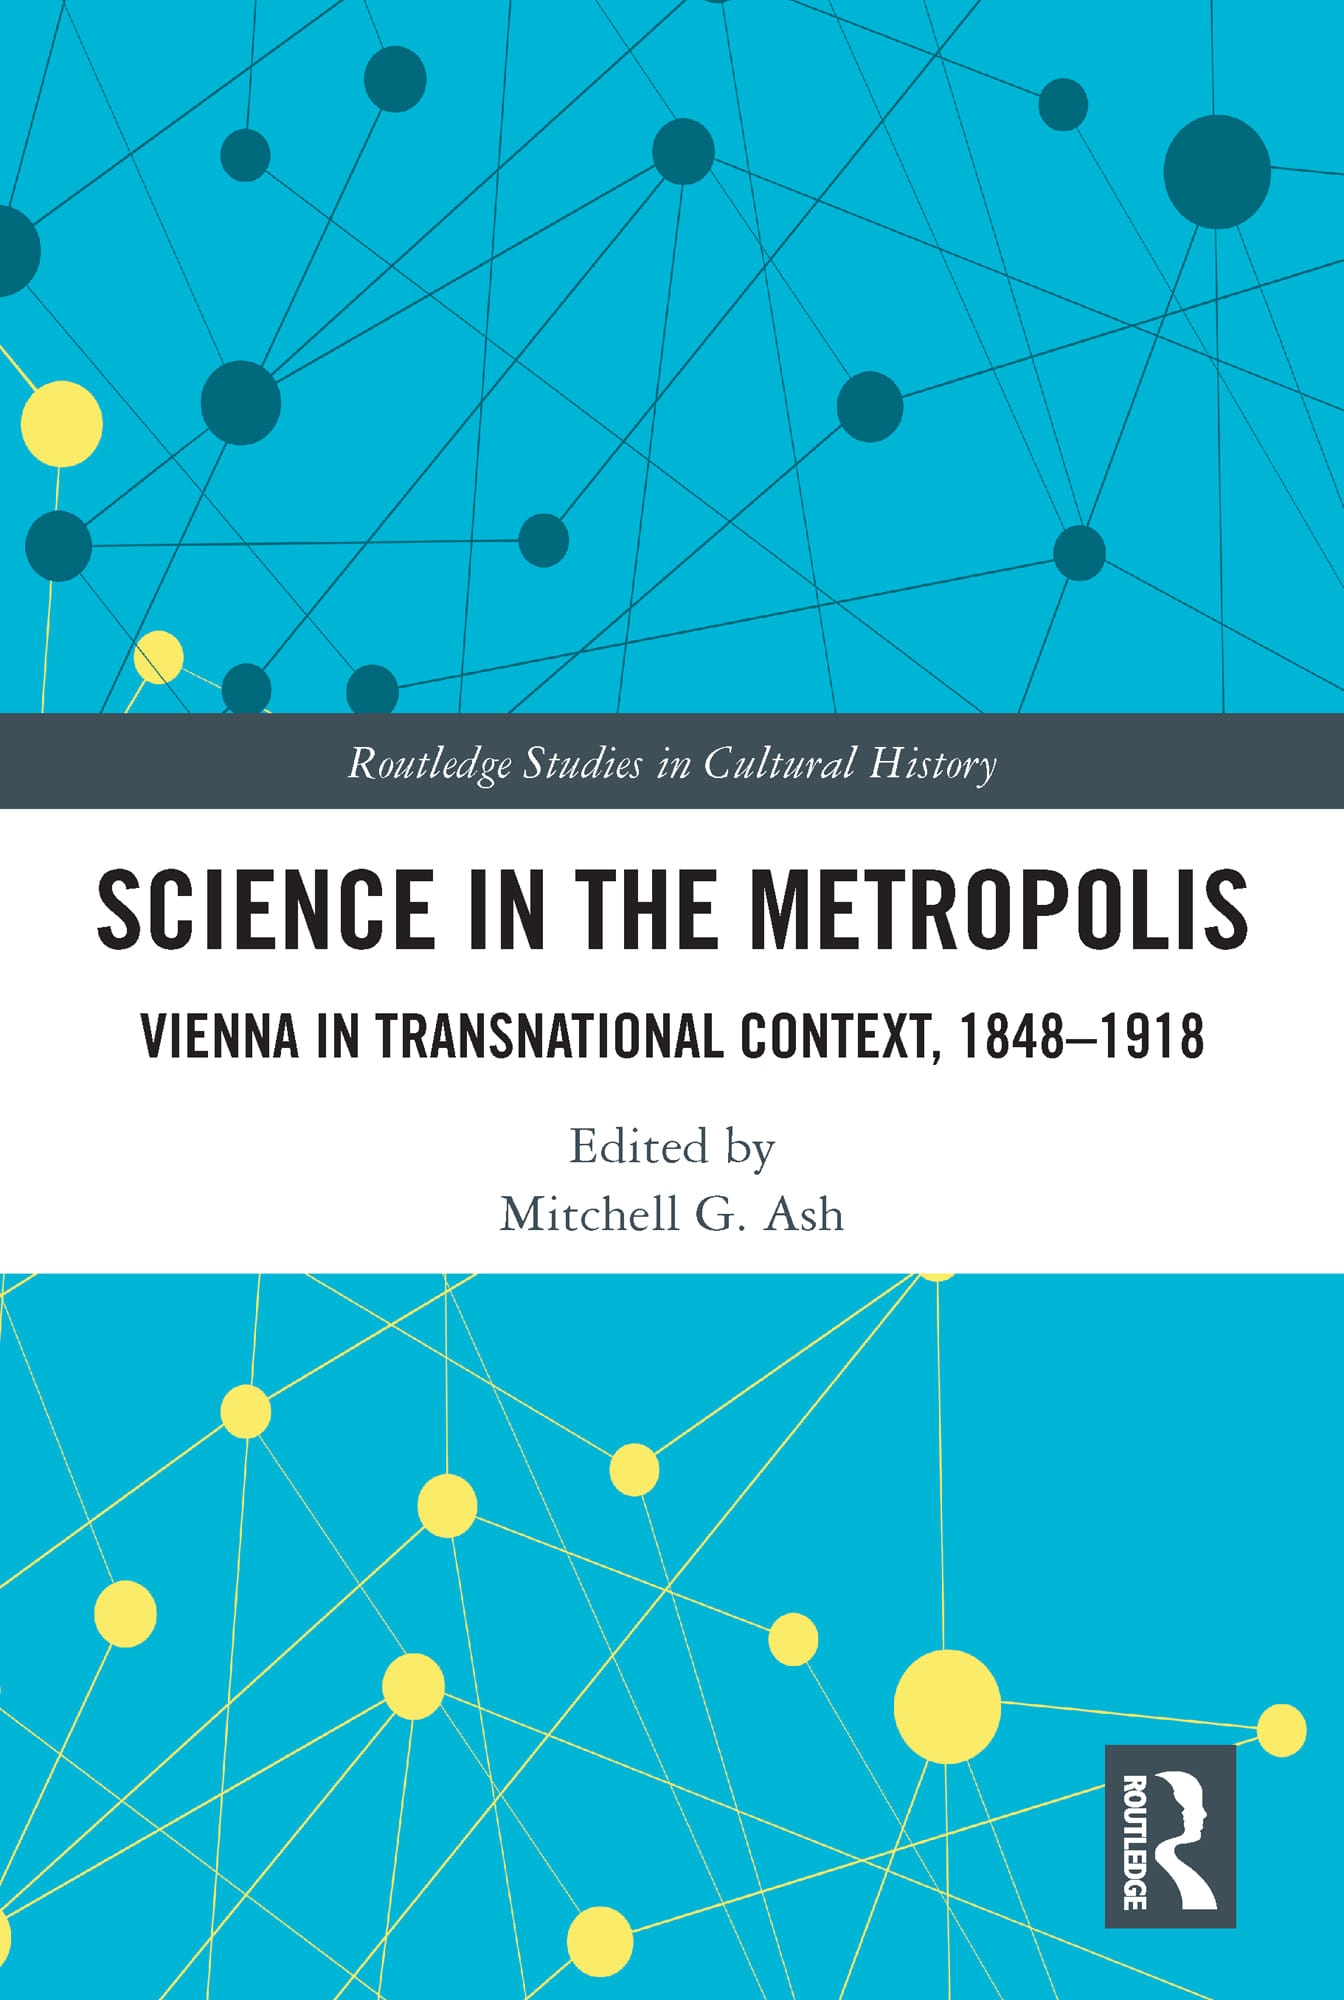 Science in the Metropolis: Vienna in Transnational Context, 1848-1918